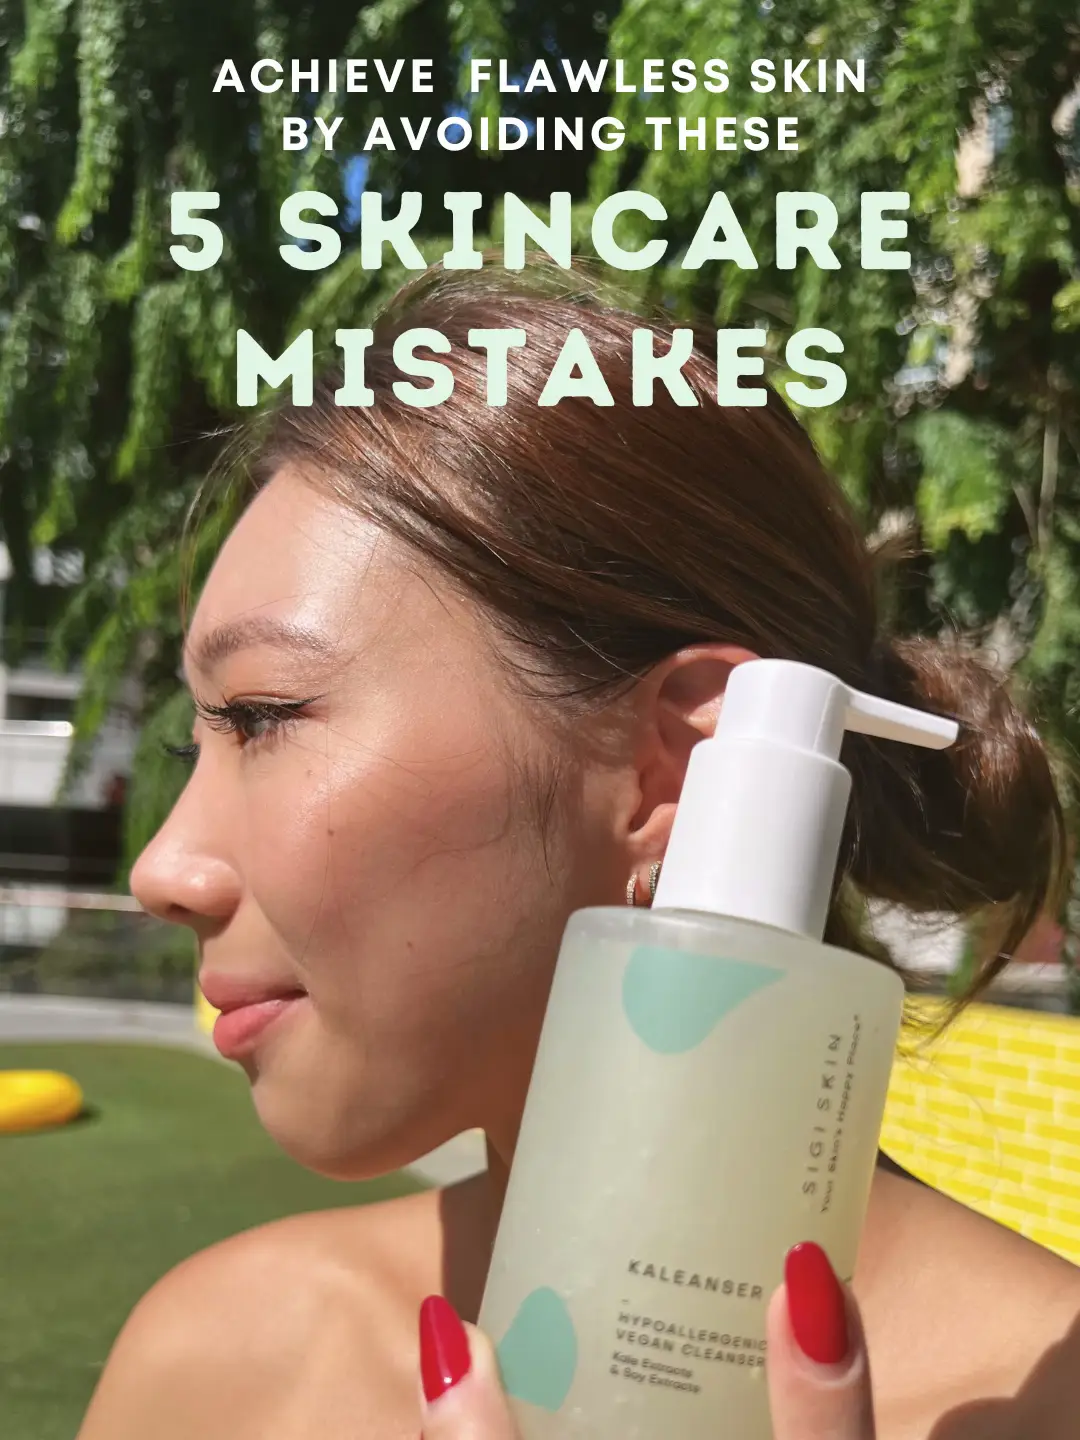 Don’t Make These Skincare Mistakes ❌'s images(0)